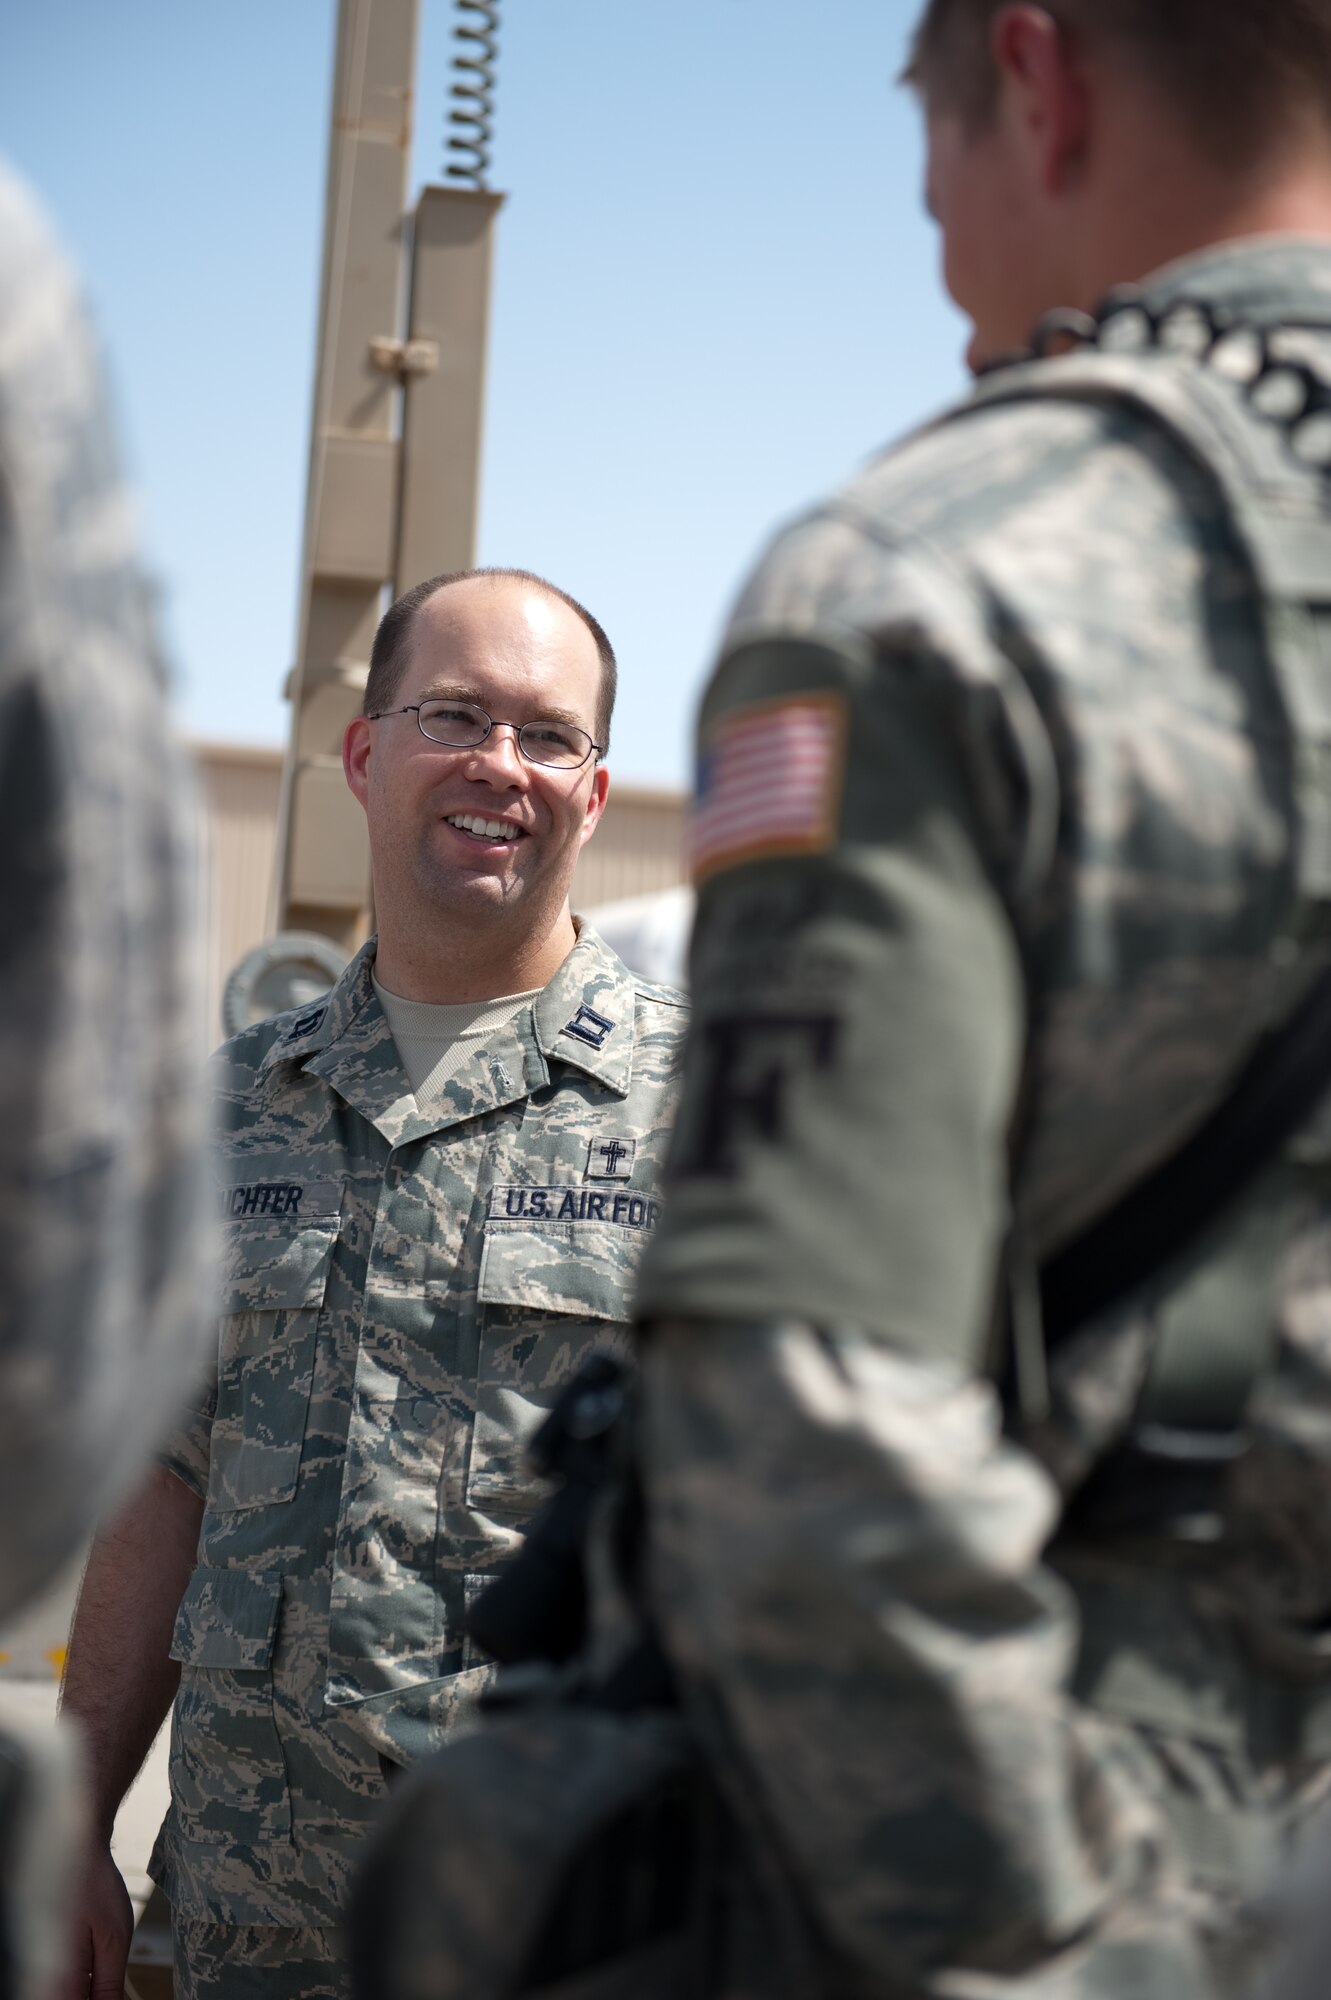 Deployed Chaplain (Capt.) Mark Juchter, 379th Air Expeditionary Wing, deployed from Tinker to provide ministry for sericemembers supporting Operations Iraqi and Enduring Freedom, visits with Airmen from the 379th Expeditionary Security Forces Squadron, Sept. 24, in Southwest Asia. Chaplain Juchter leads the weekly traditional Protestant service and visits regularly with Airmen around the base. (Air Force photo by Staff Sgt. Robert Barney)
